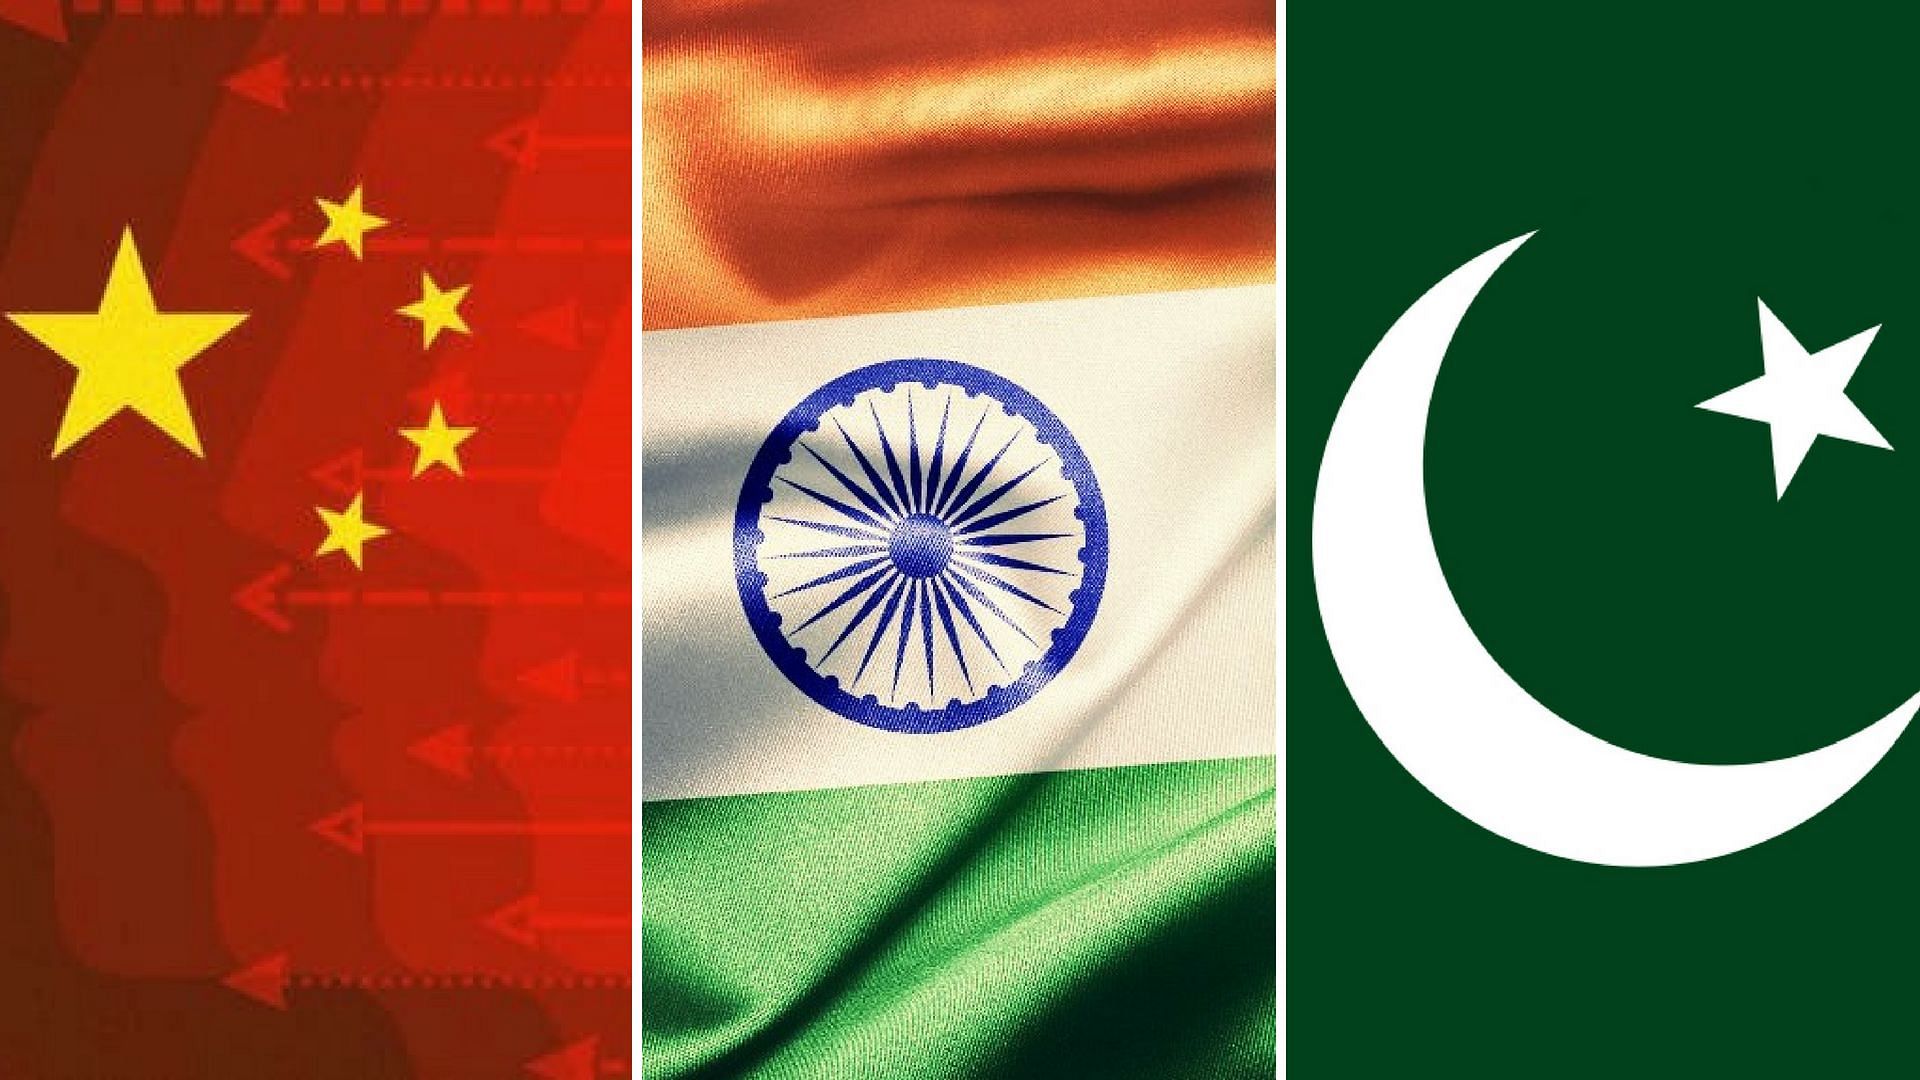 China has been blocking India’s entry into the 48-member Nuclear Suppliers Group (NSG) on the ground that New Delhi has not signed the Nuclear Non-Proliferation Treaty (NPT).